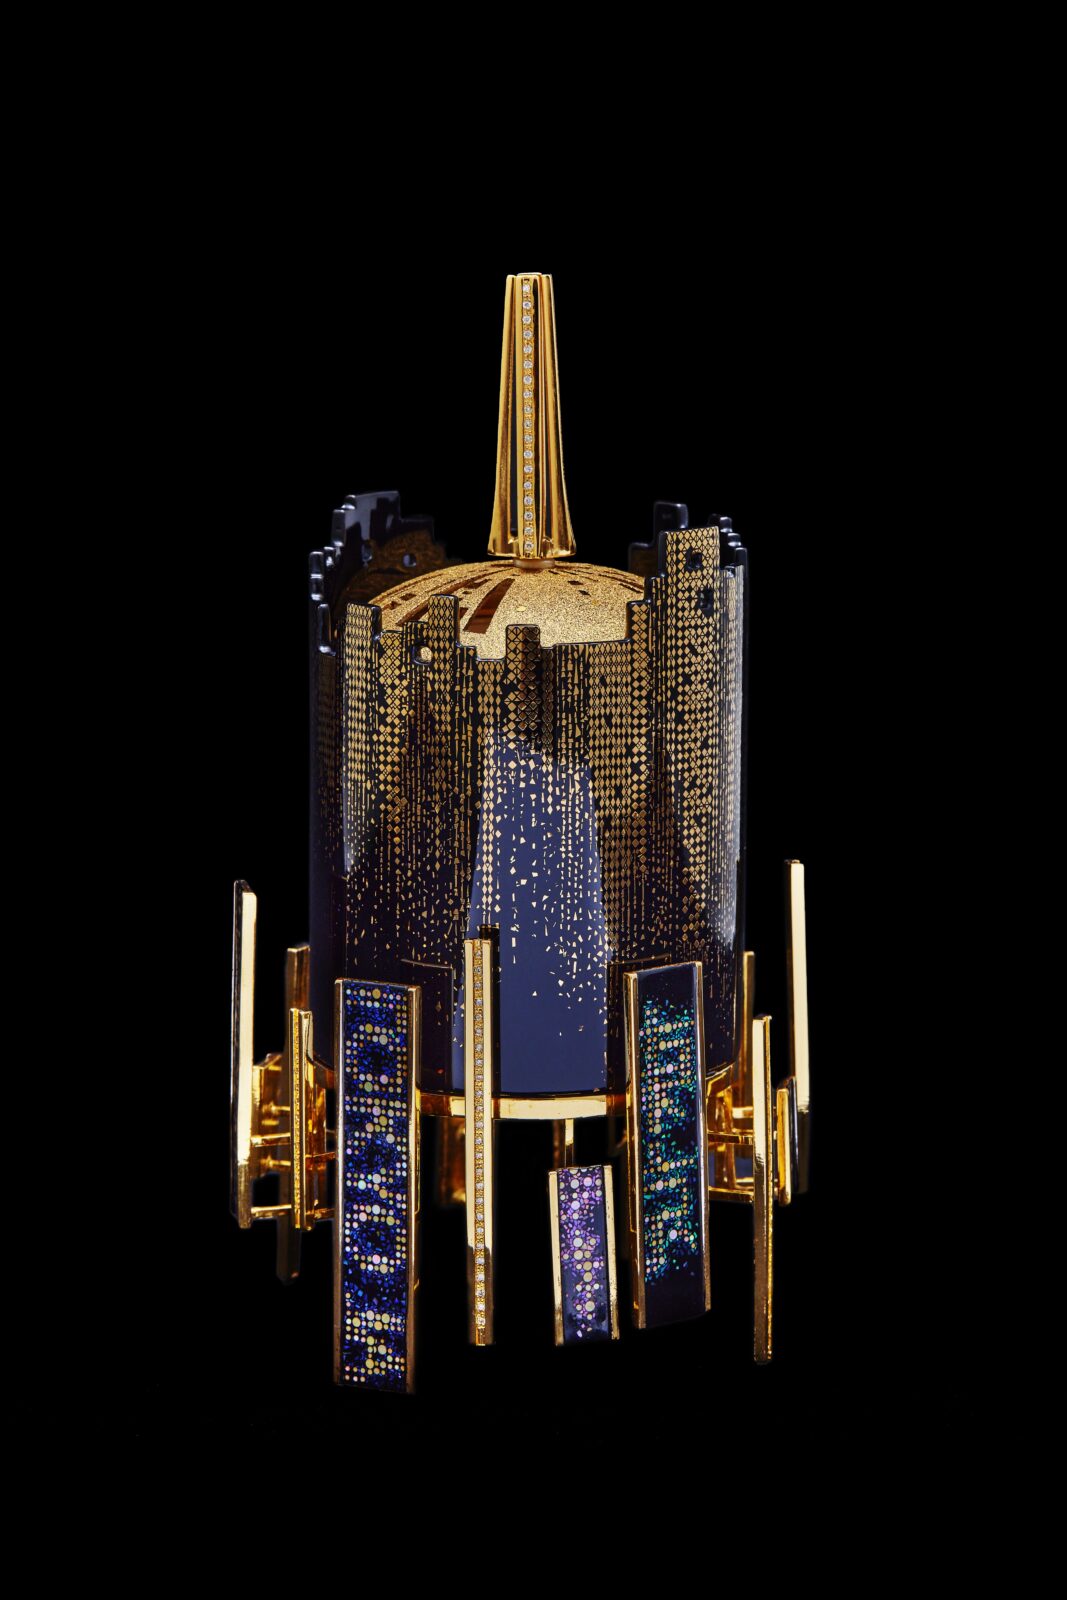 Incense Burner with Inlaid Gold and Mother-of-pearl, “City”